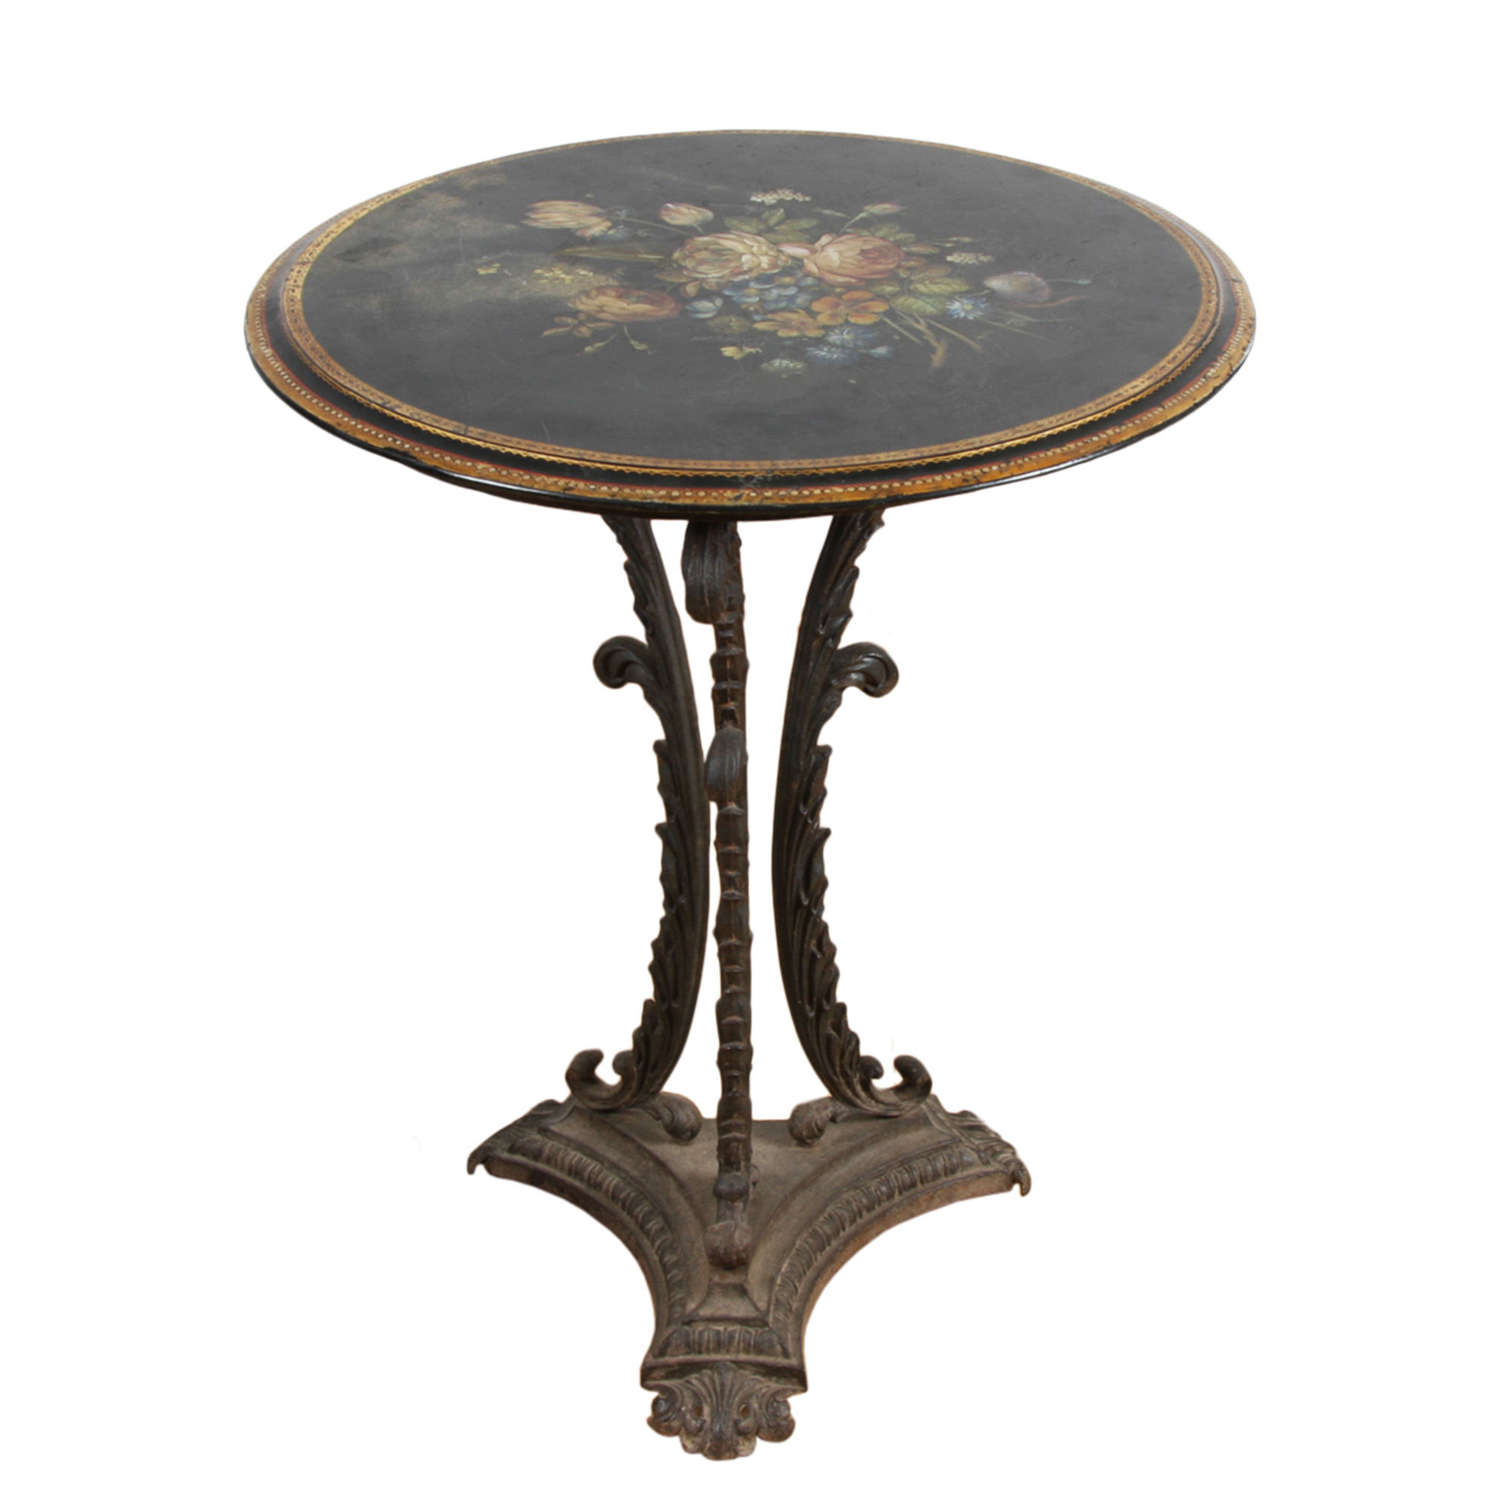 Cast Iron Side Table With Painted Slate Top